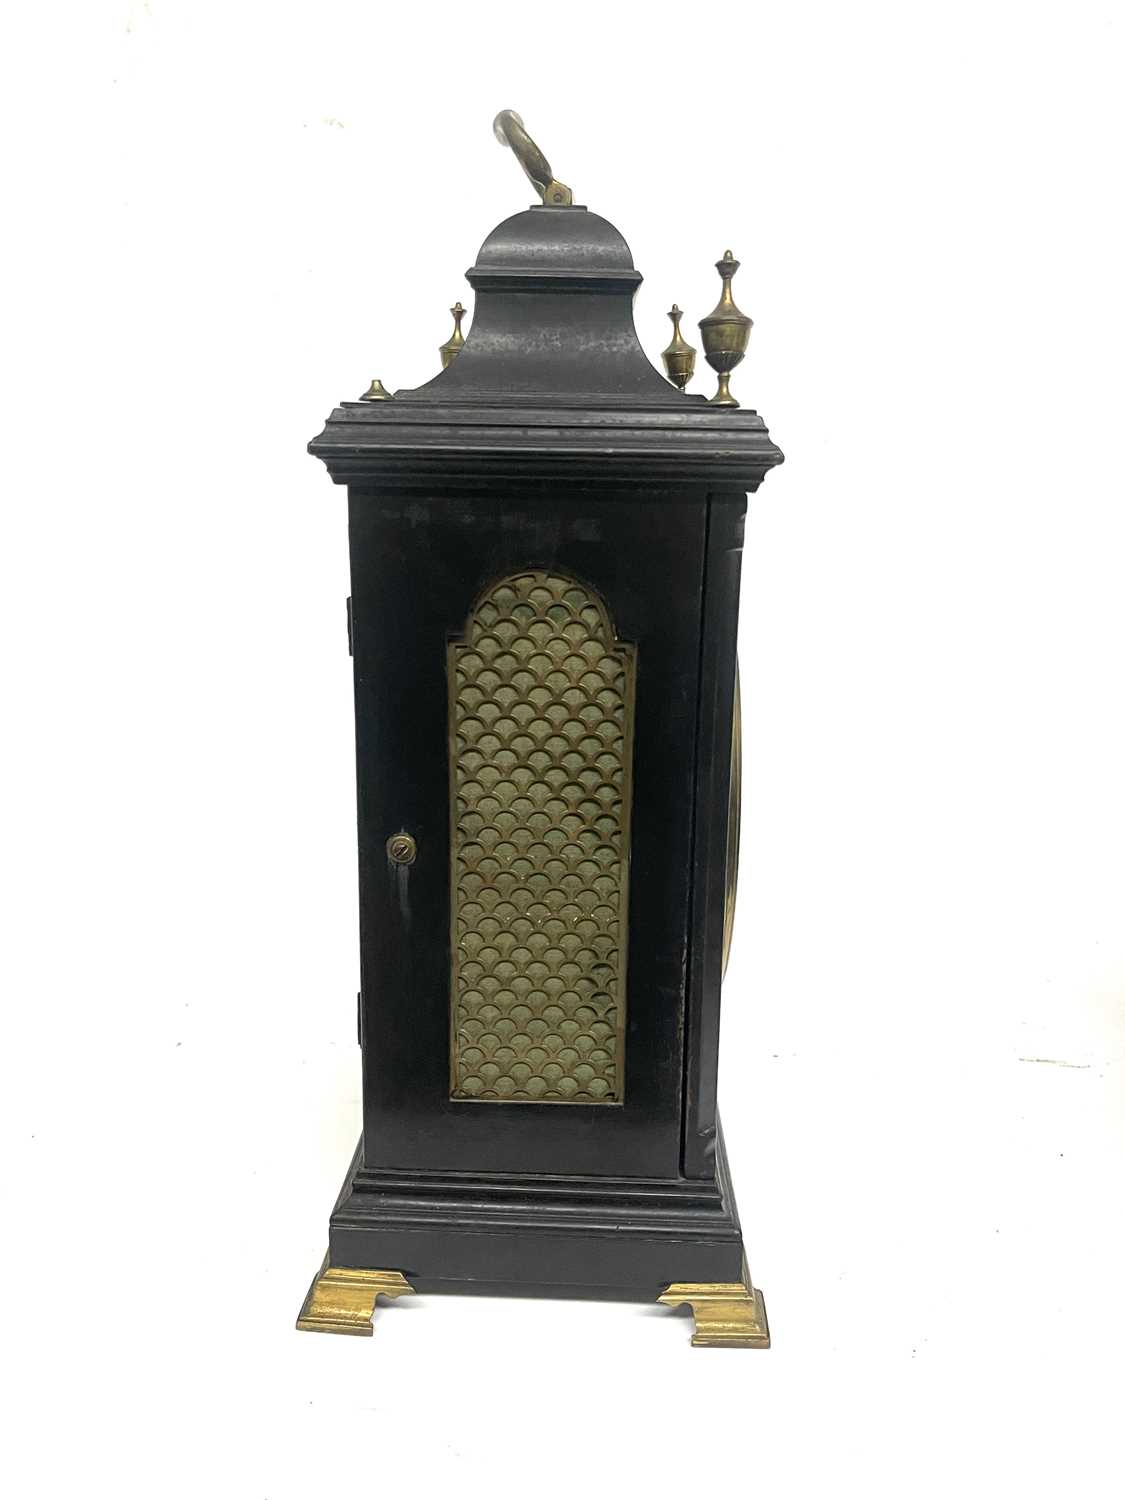 Thomas Green, Bristol Hotwell, a George III bracket clock, ebonised chamfered case, caddy top with - Image 2 of 8